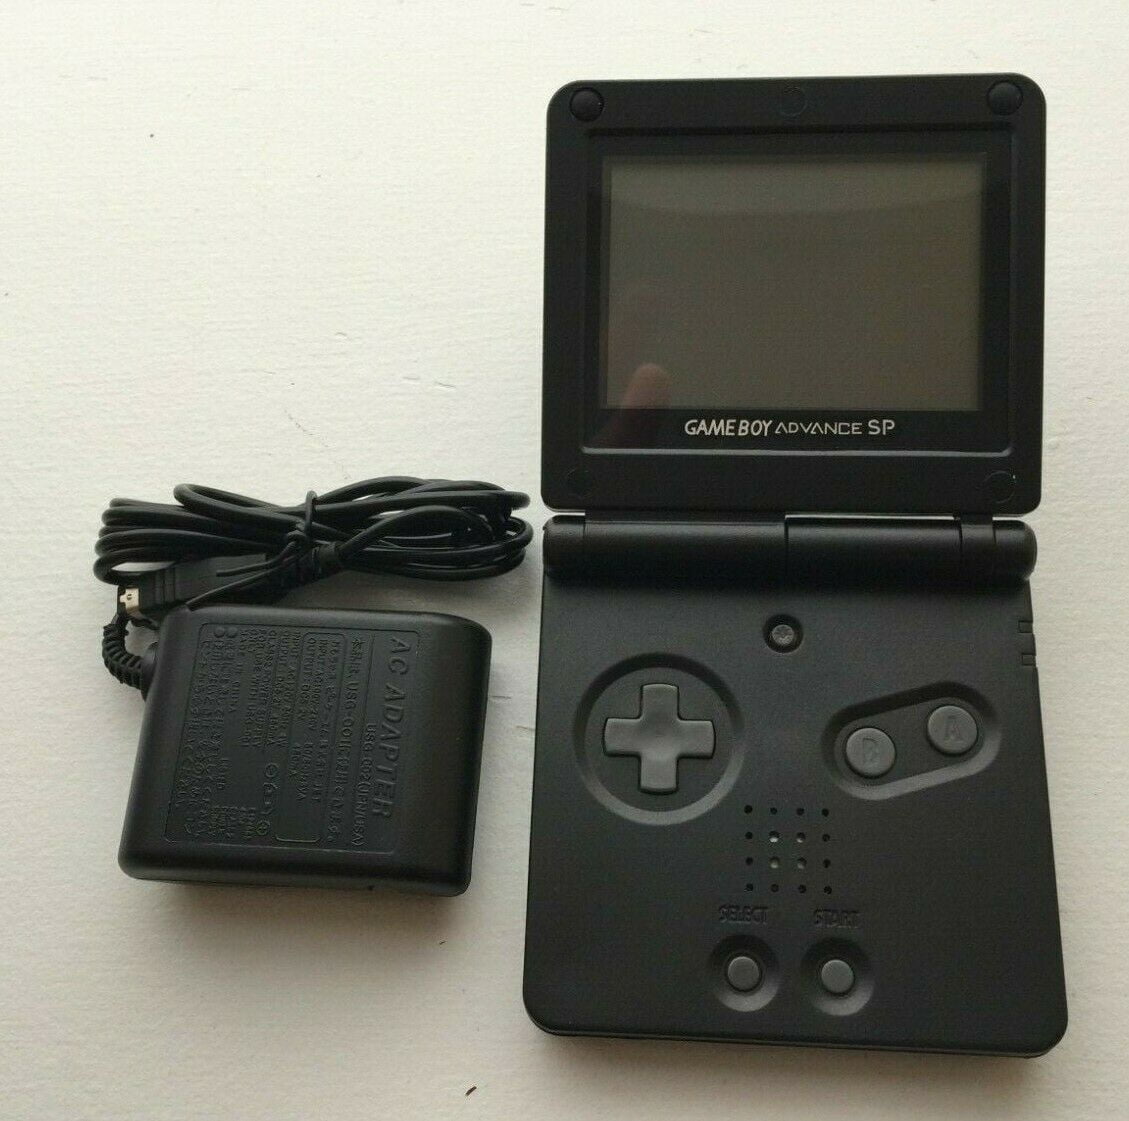 Nintendo Game Boy Advance SP Onyx Black with charger Used